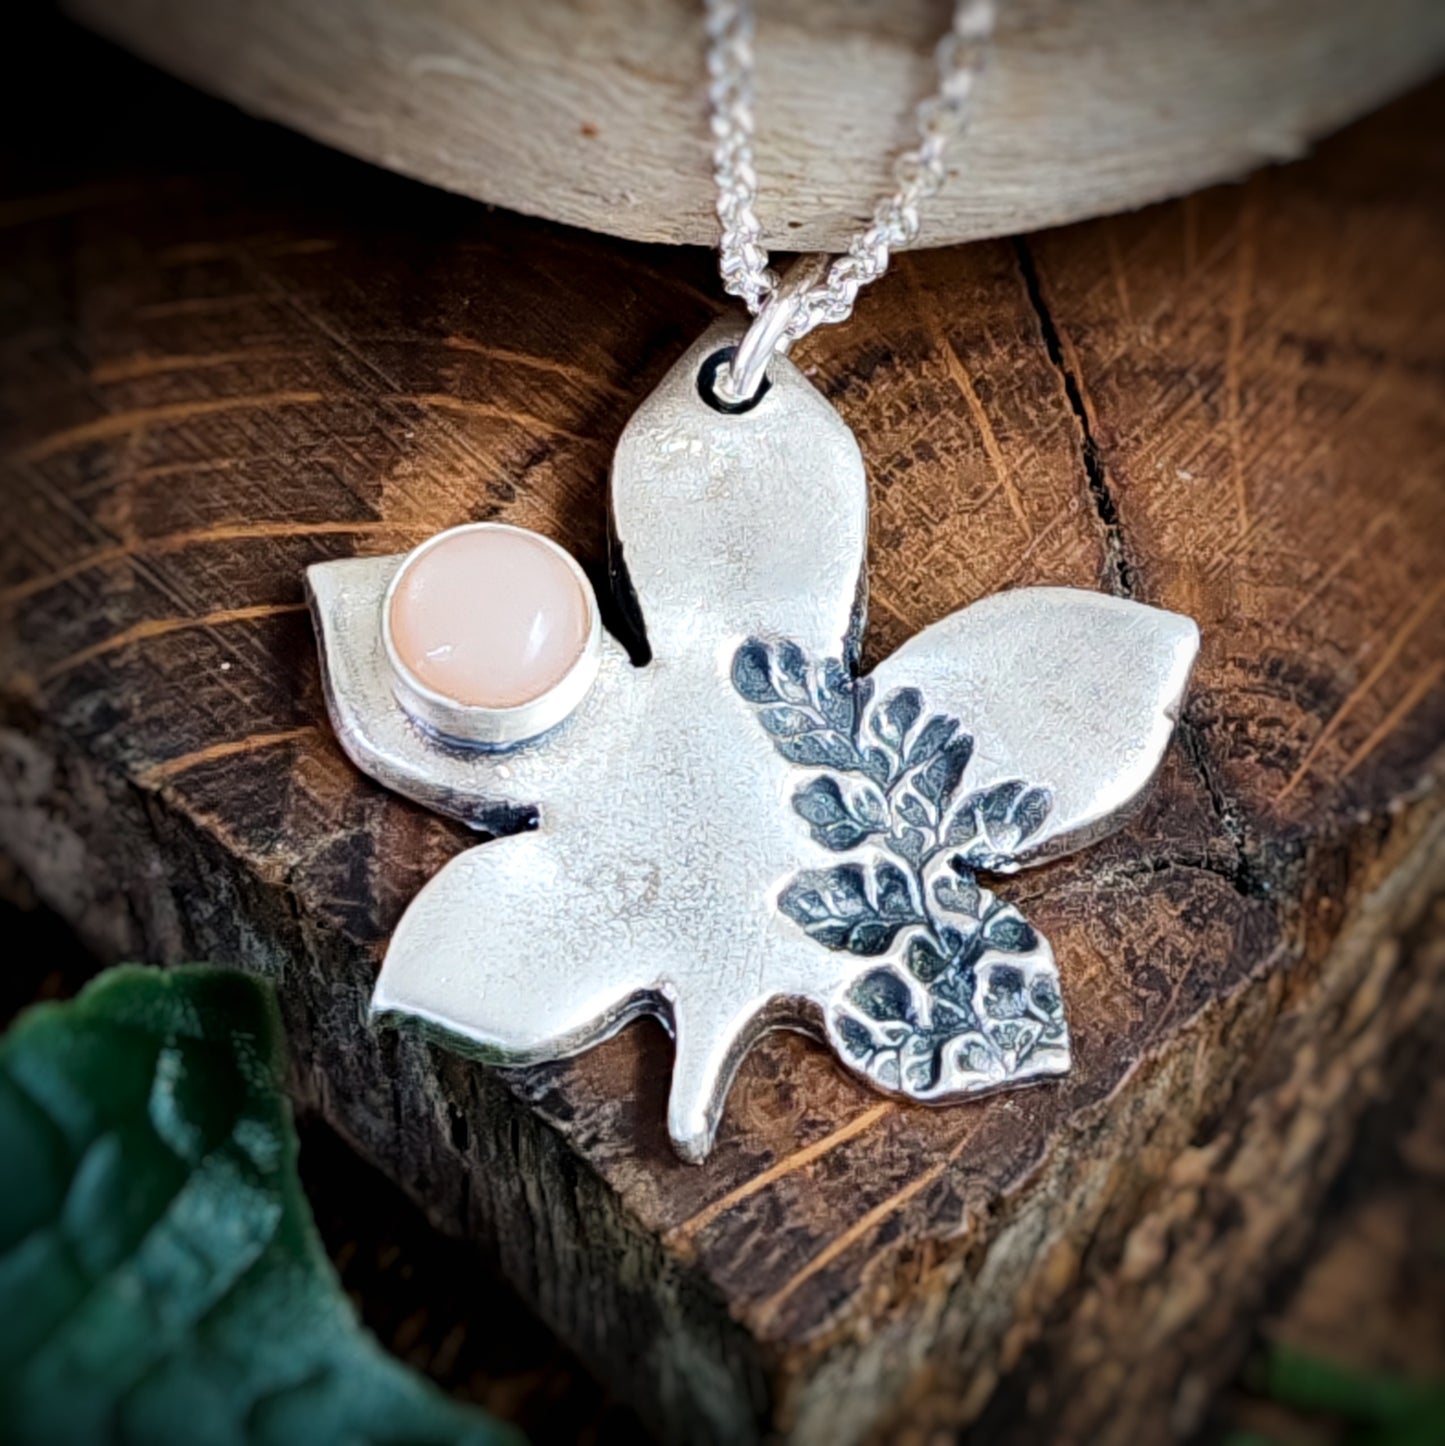 Maple Leaf Necklace